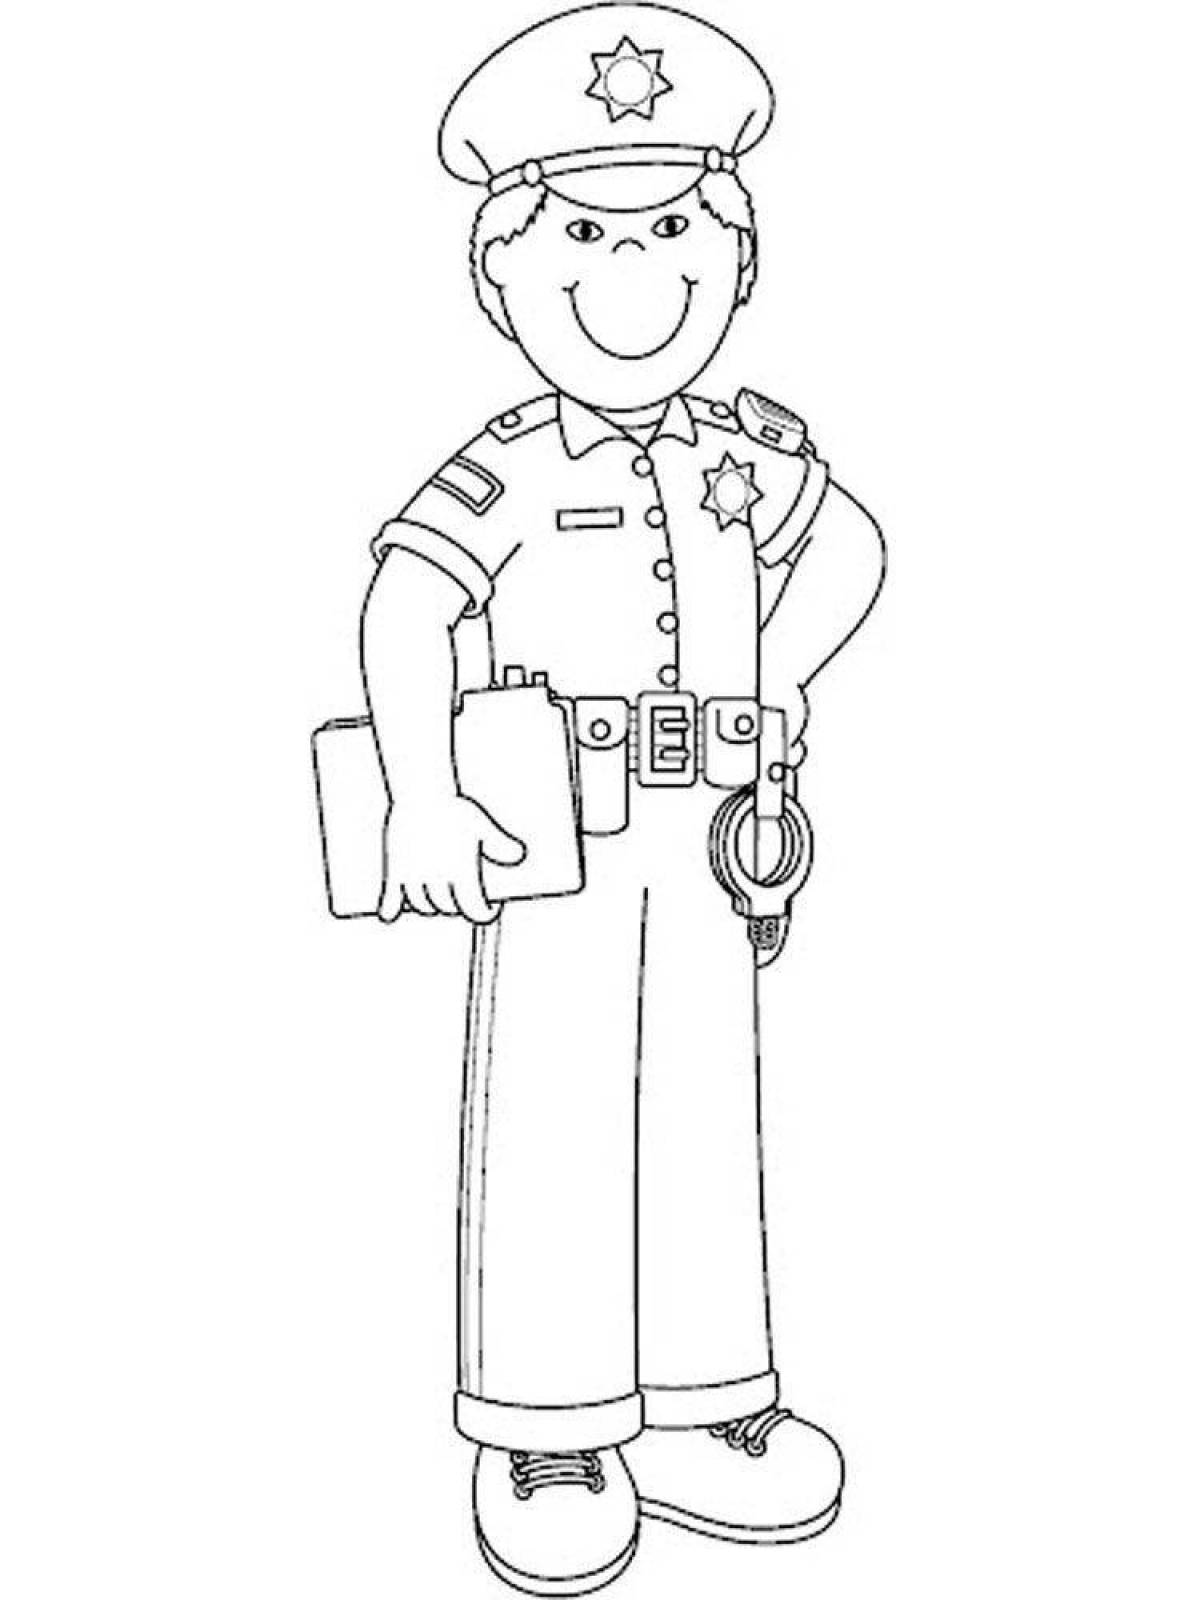 Dedicated police coloring book